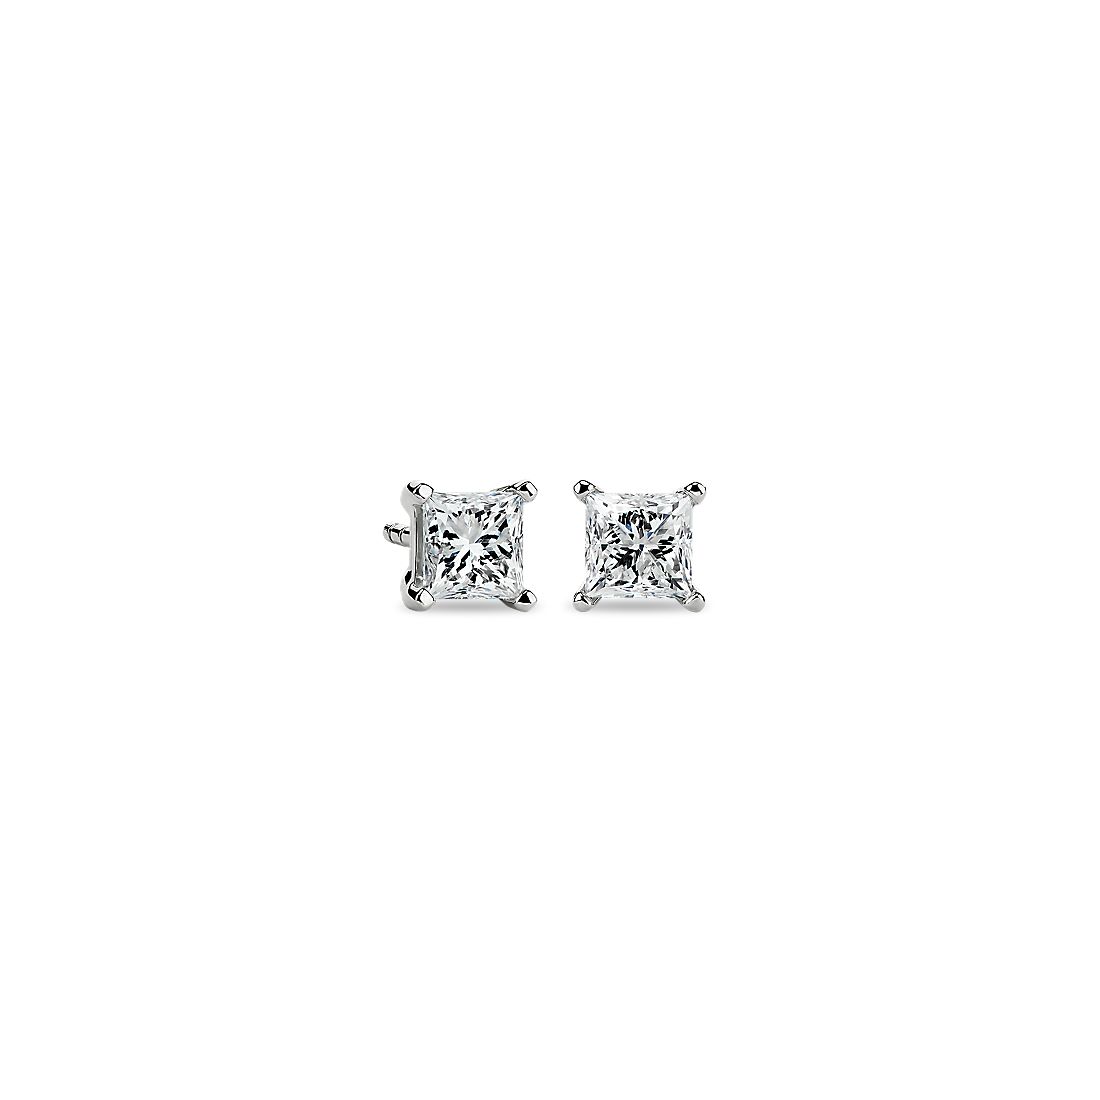 14Kt White Gold Blue Topaz Princess Cut Stud Earrings Dainty Gift For Her Bridesmaid Bridal Wedding Jewelry